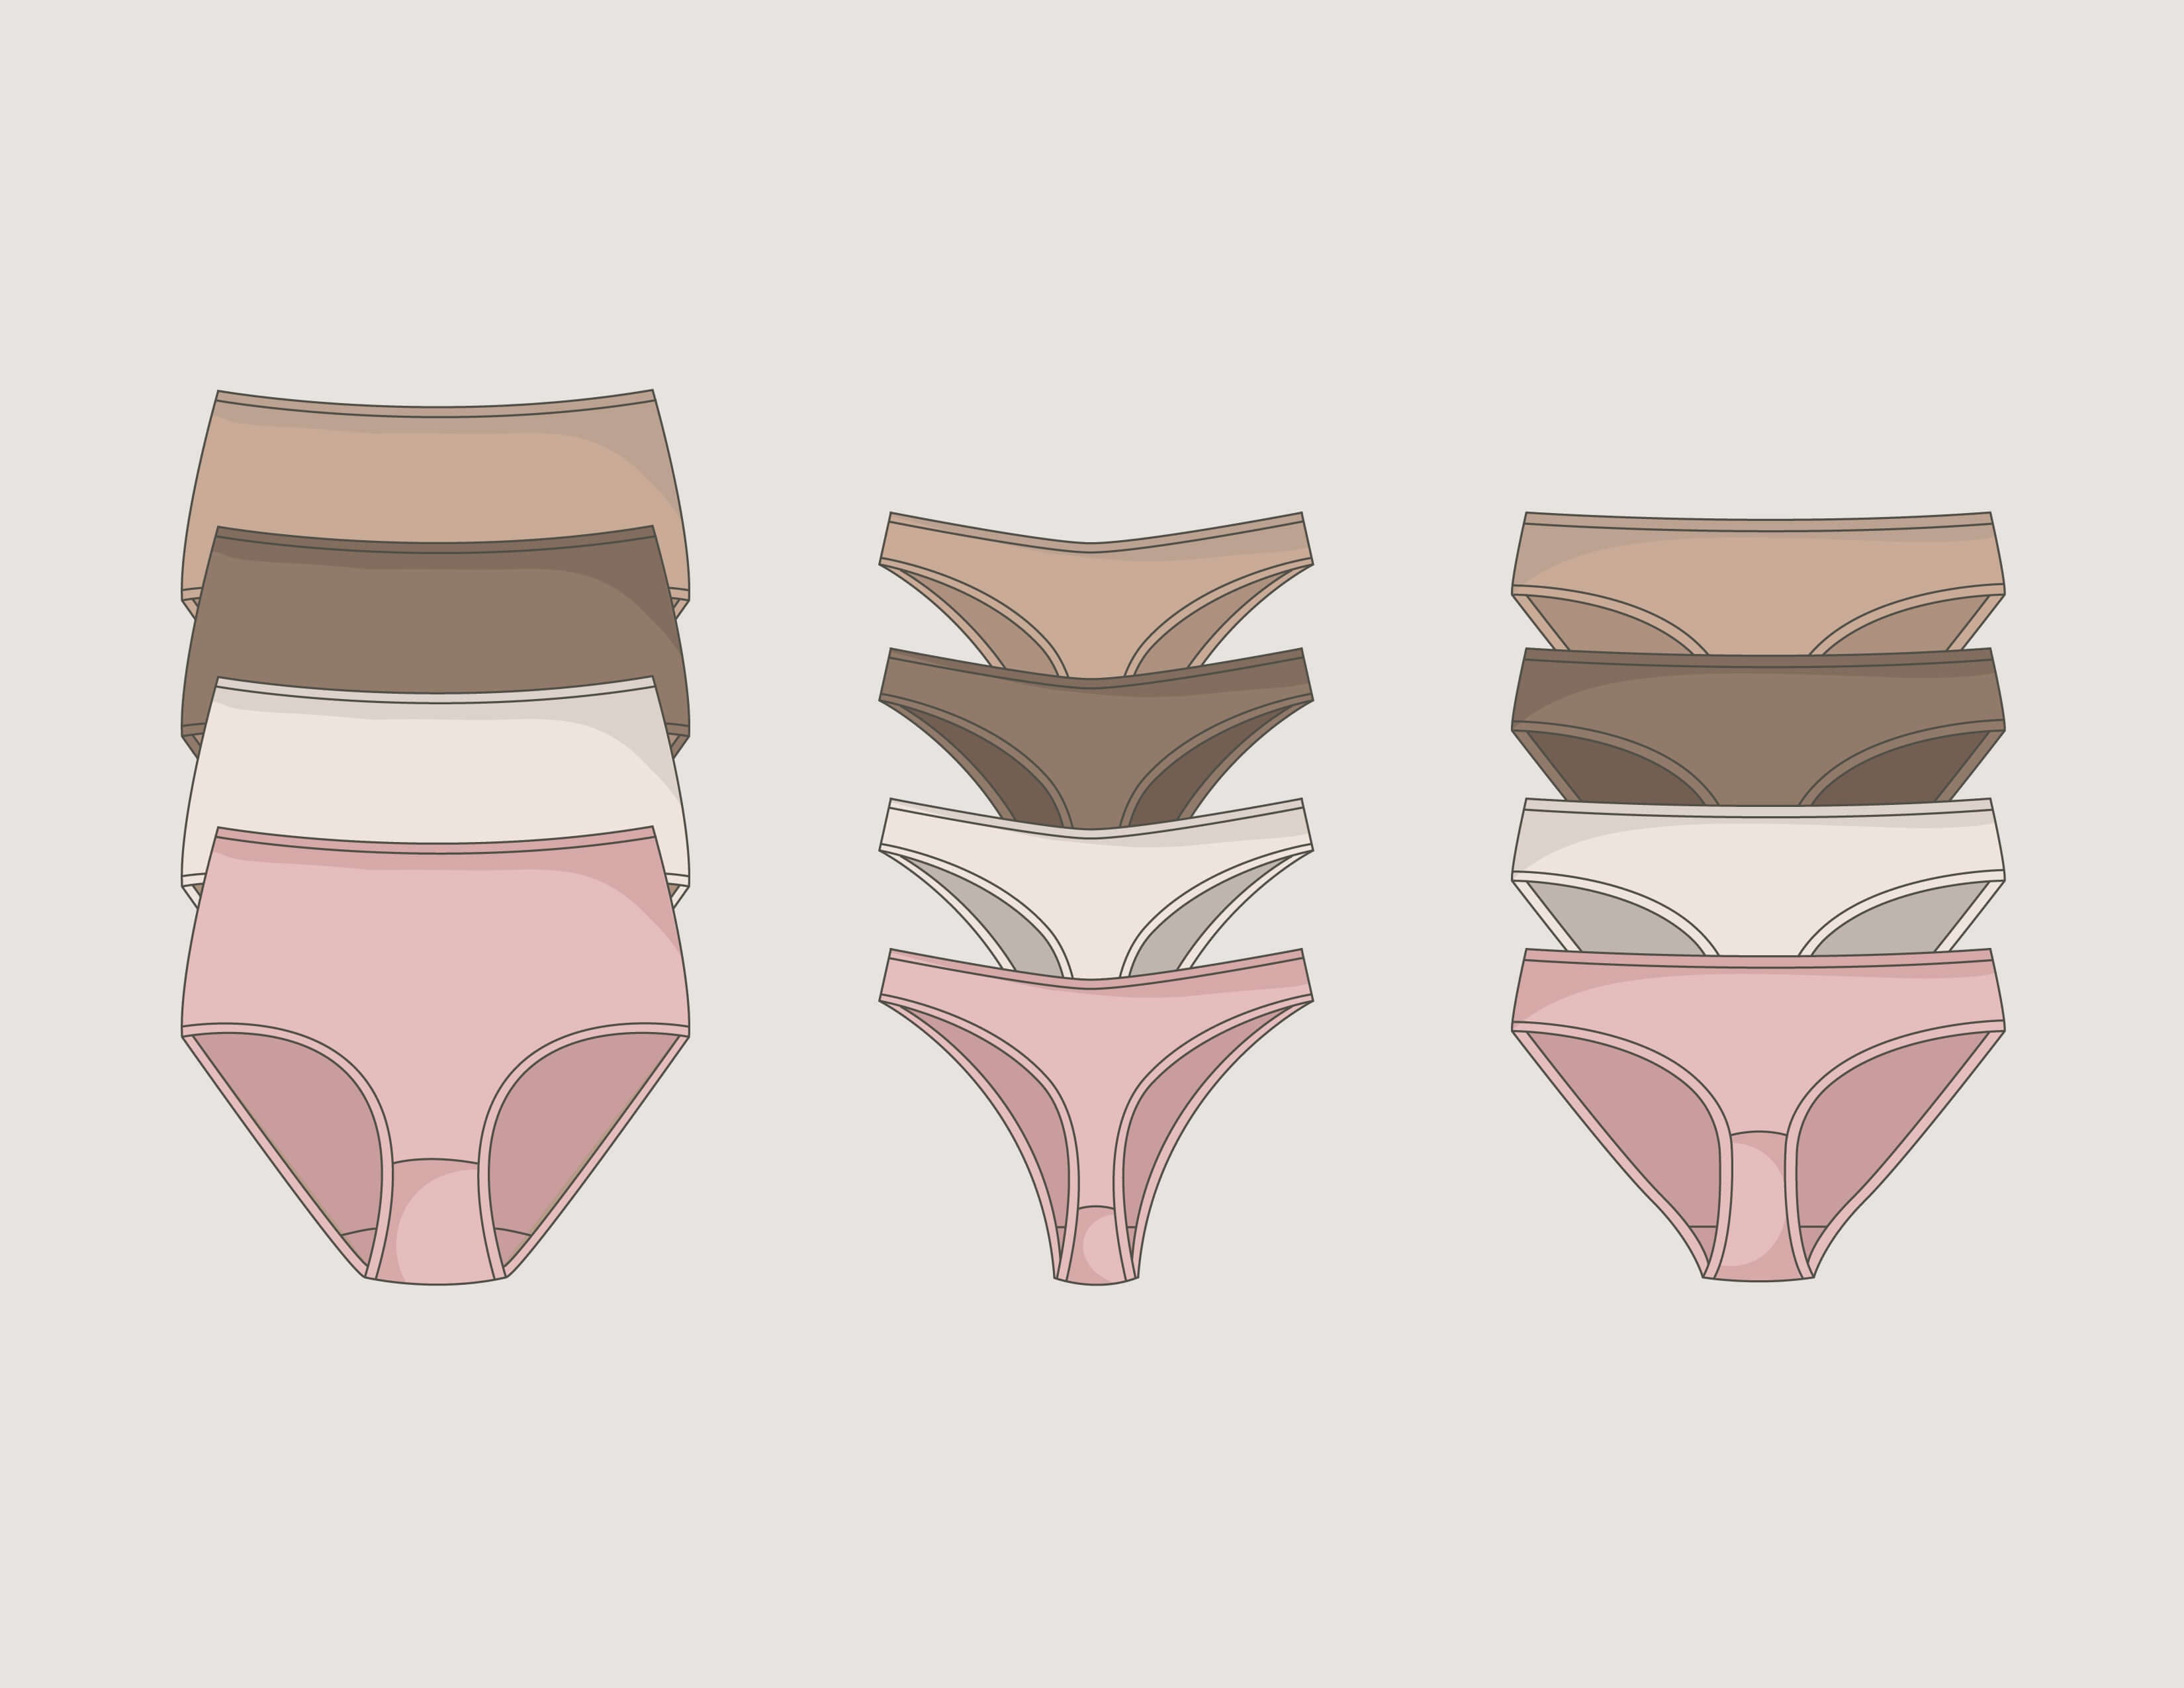 Five Types Of Panties Every Woman Should Own, by Adelia Leow